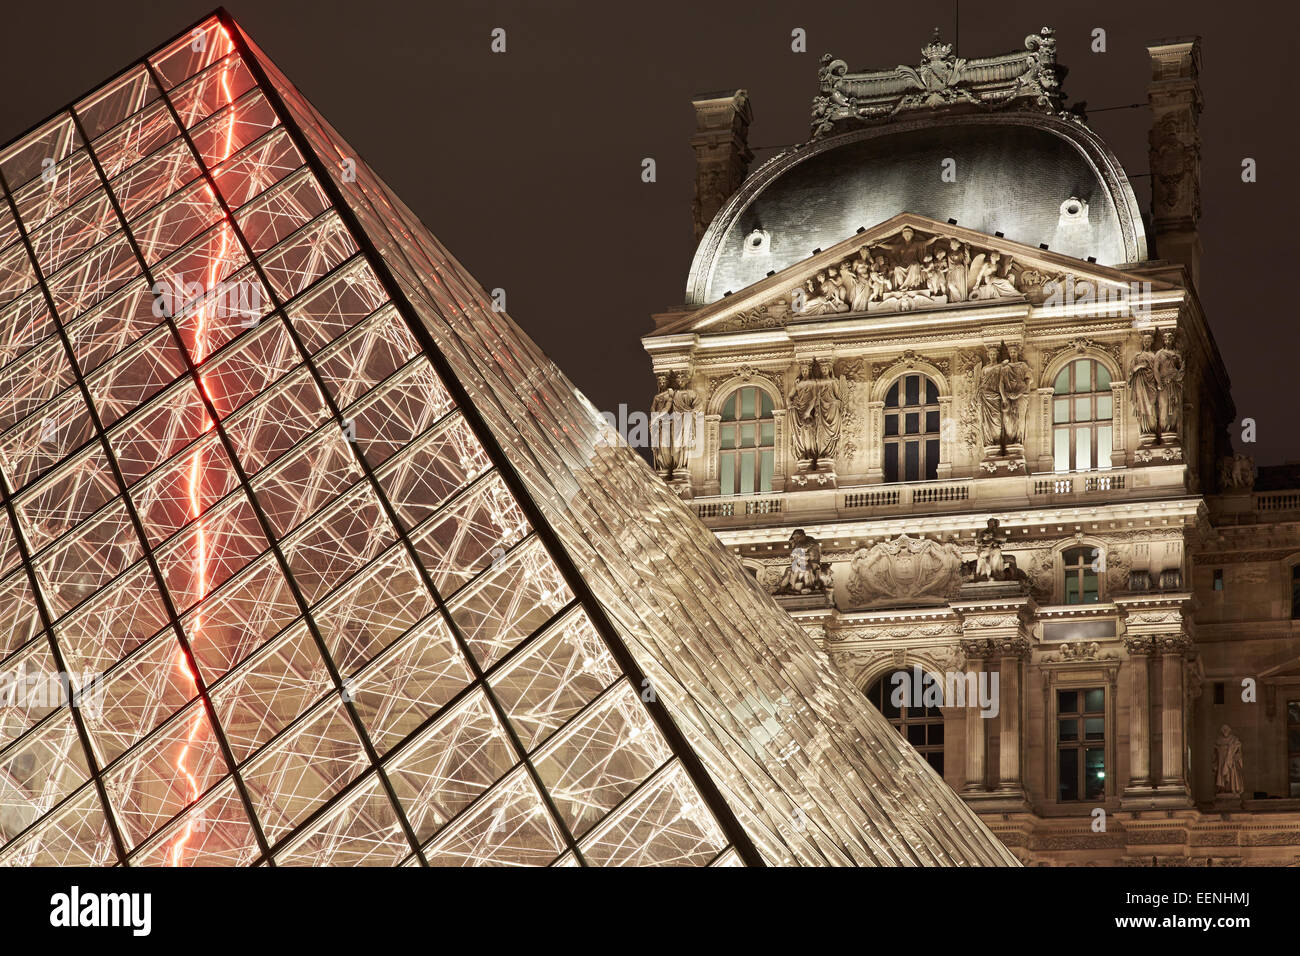 Louvre pyramid and museum night view in Paris, France Stock Photo